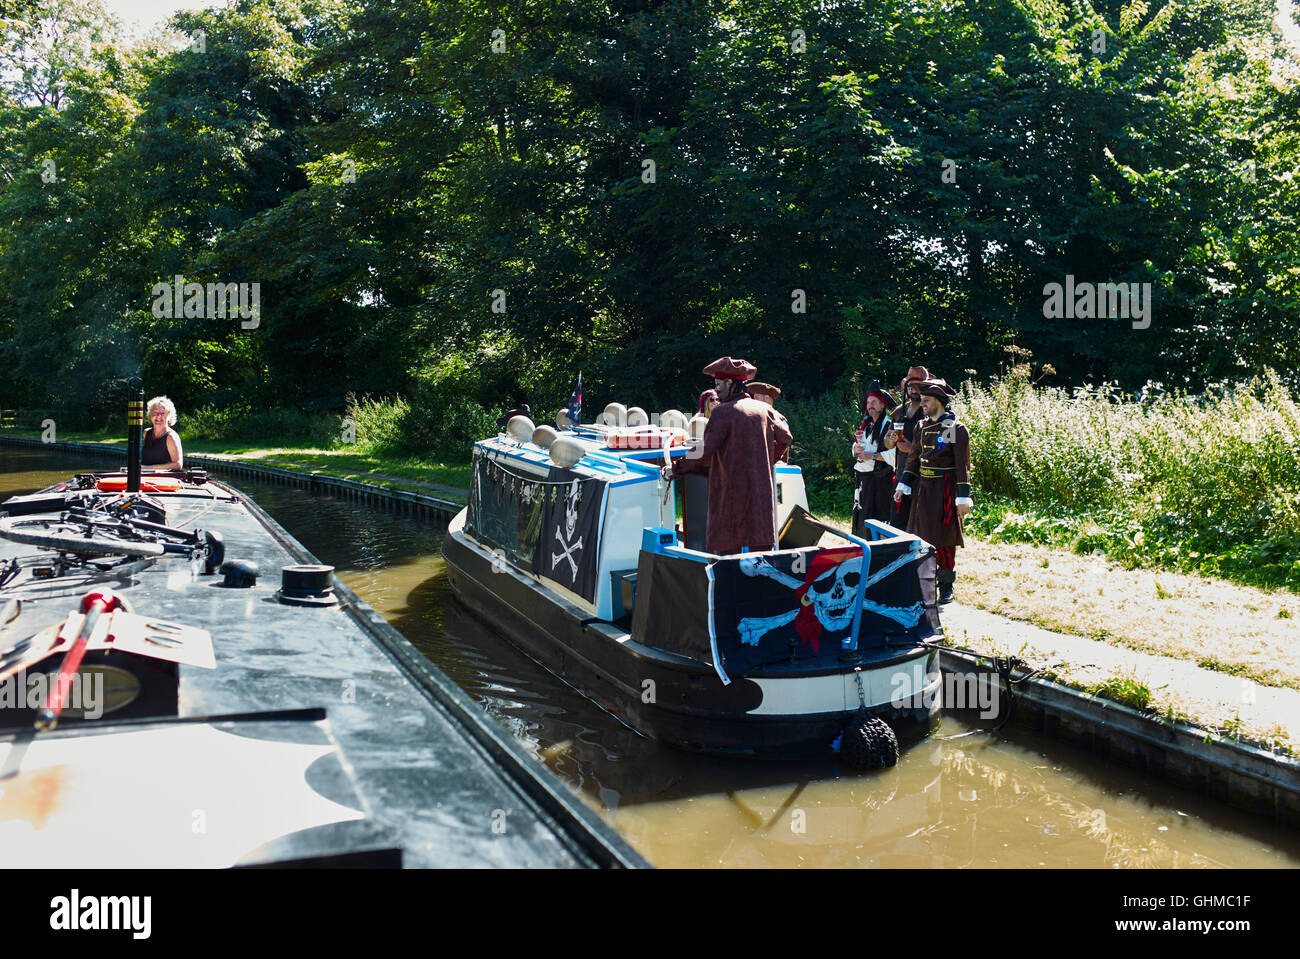 Narrowboat William passes a band of pirates in a hired dayboat on the Trent and Mersey Stock Photo